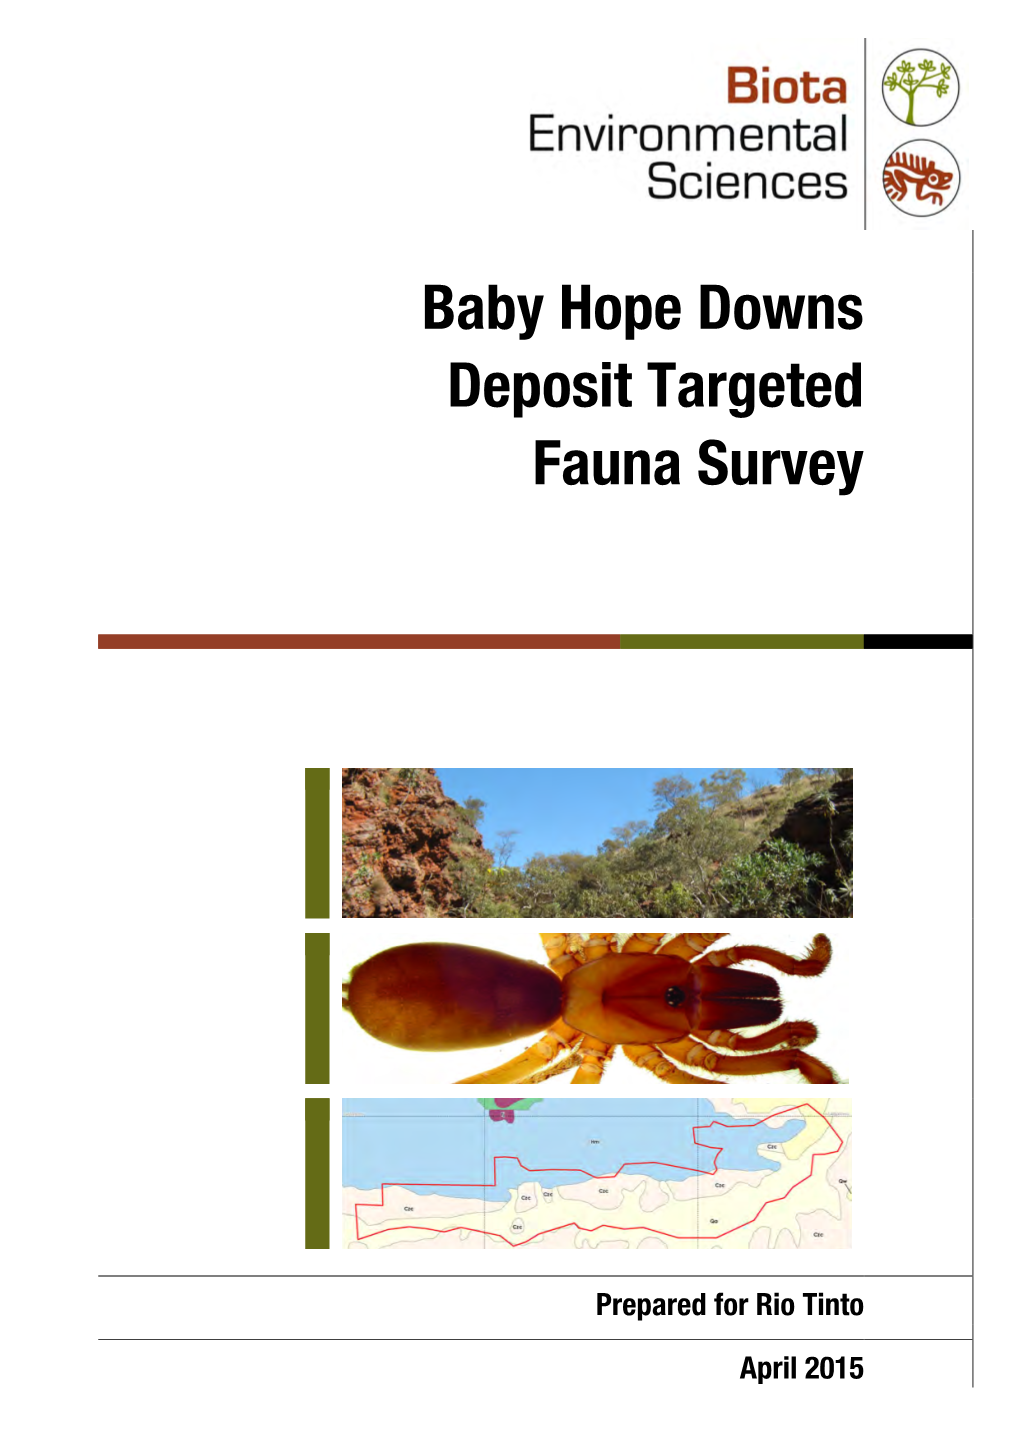 Baby Hope Downs Deposit Targeted Fauna Survey